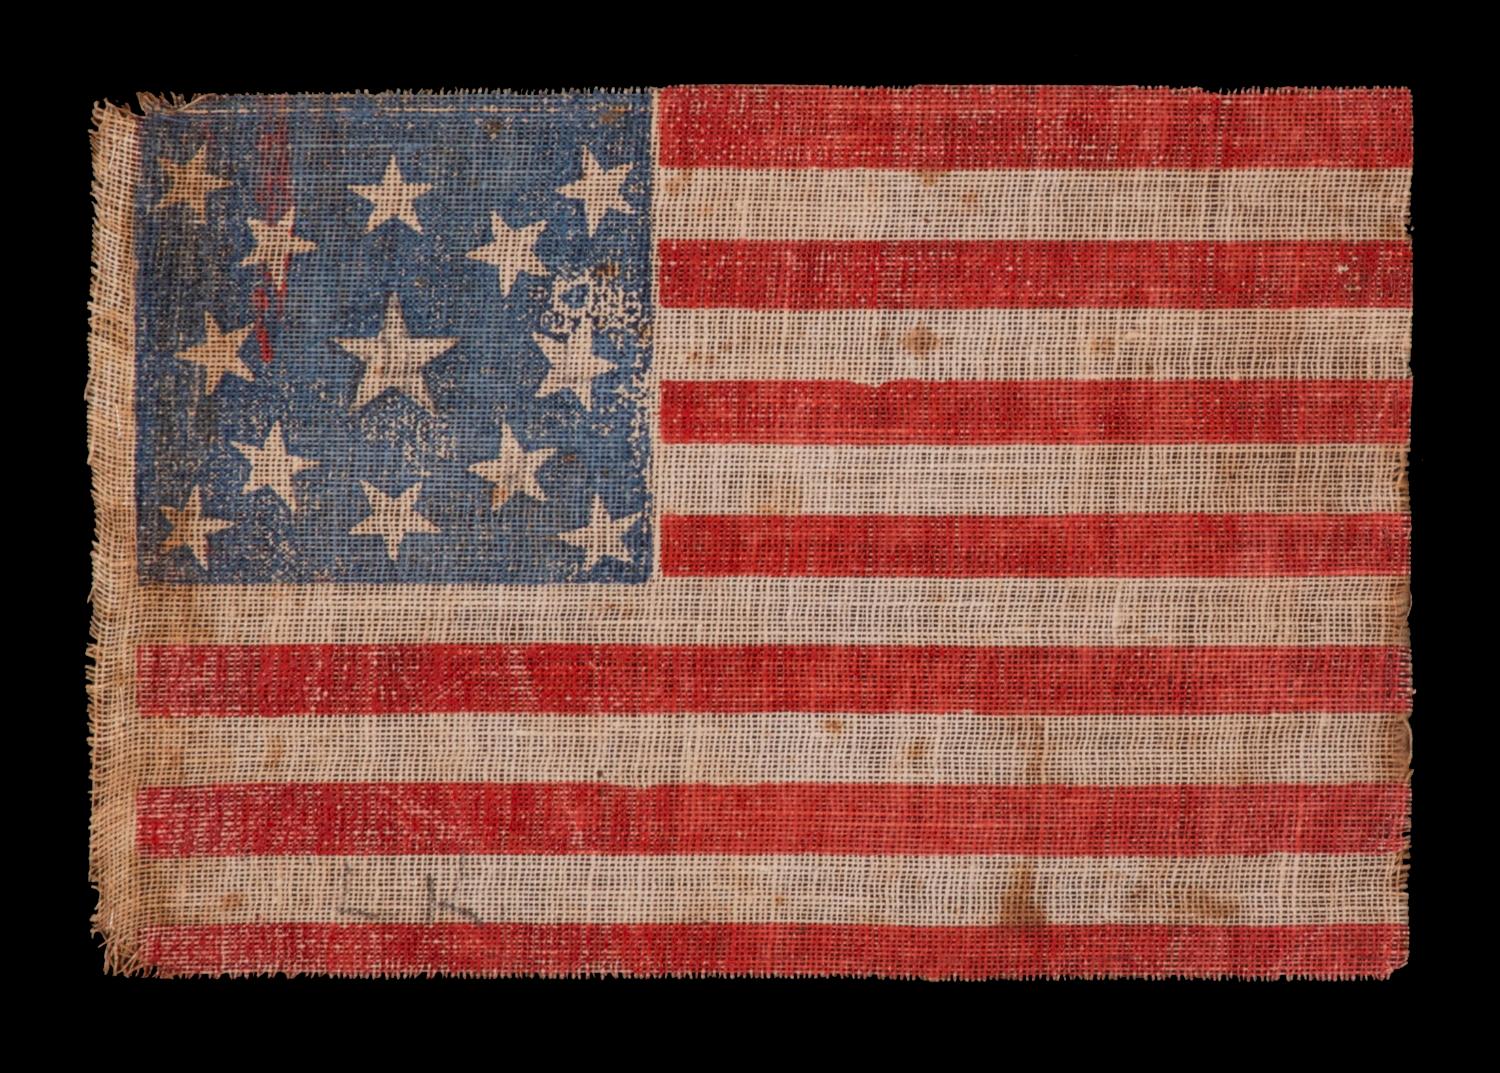 13 stars in a medallion pattern on an antique American parade flag, made for the 1876 centennial of American independence; an extremely scarce example with nice folk qualities

13 star American national parade flag, printed on coarse, glazed